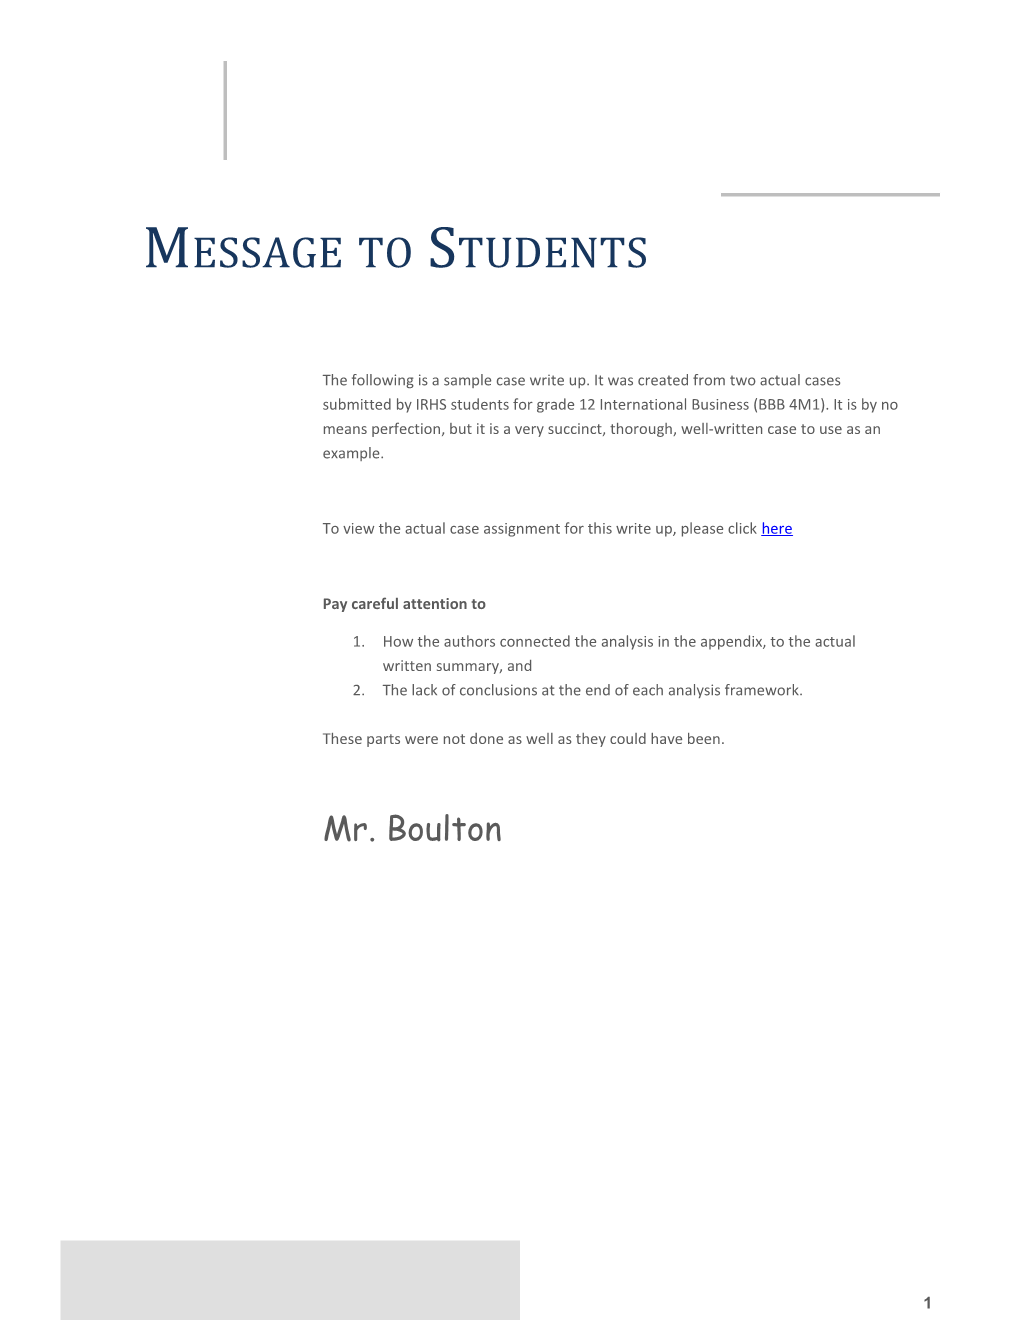 Message to Students